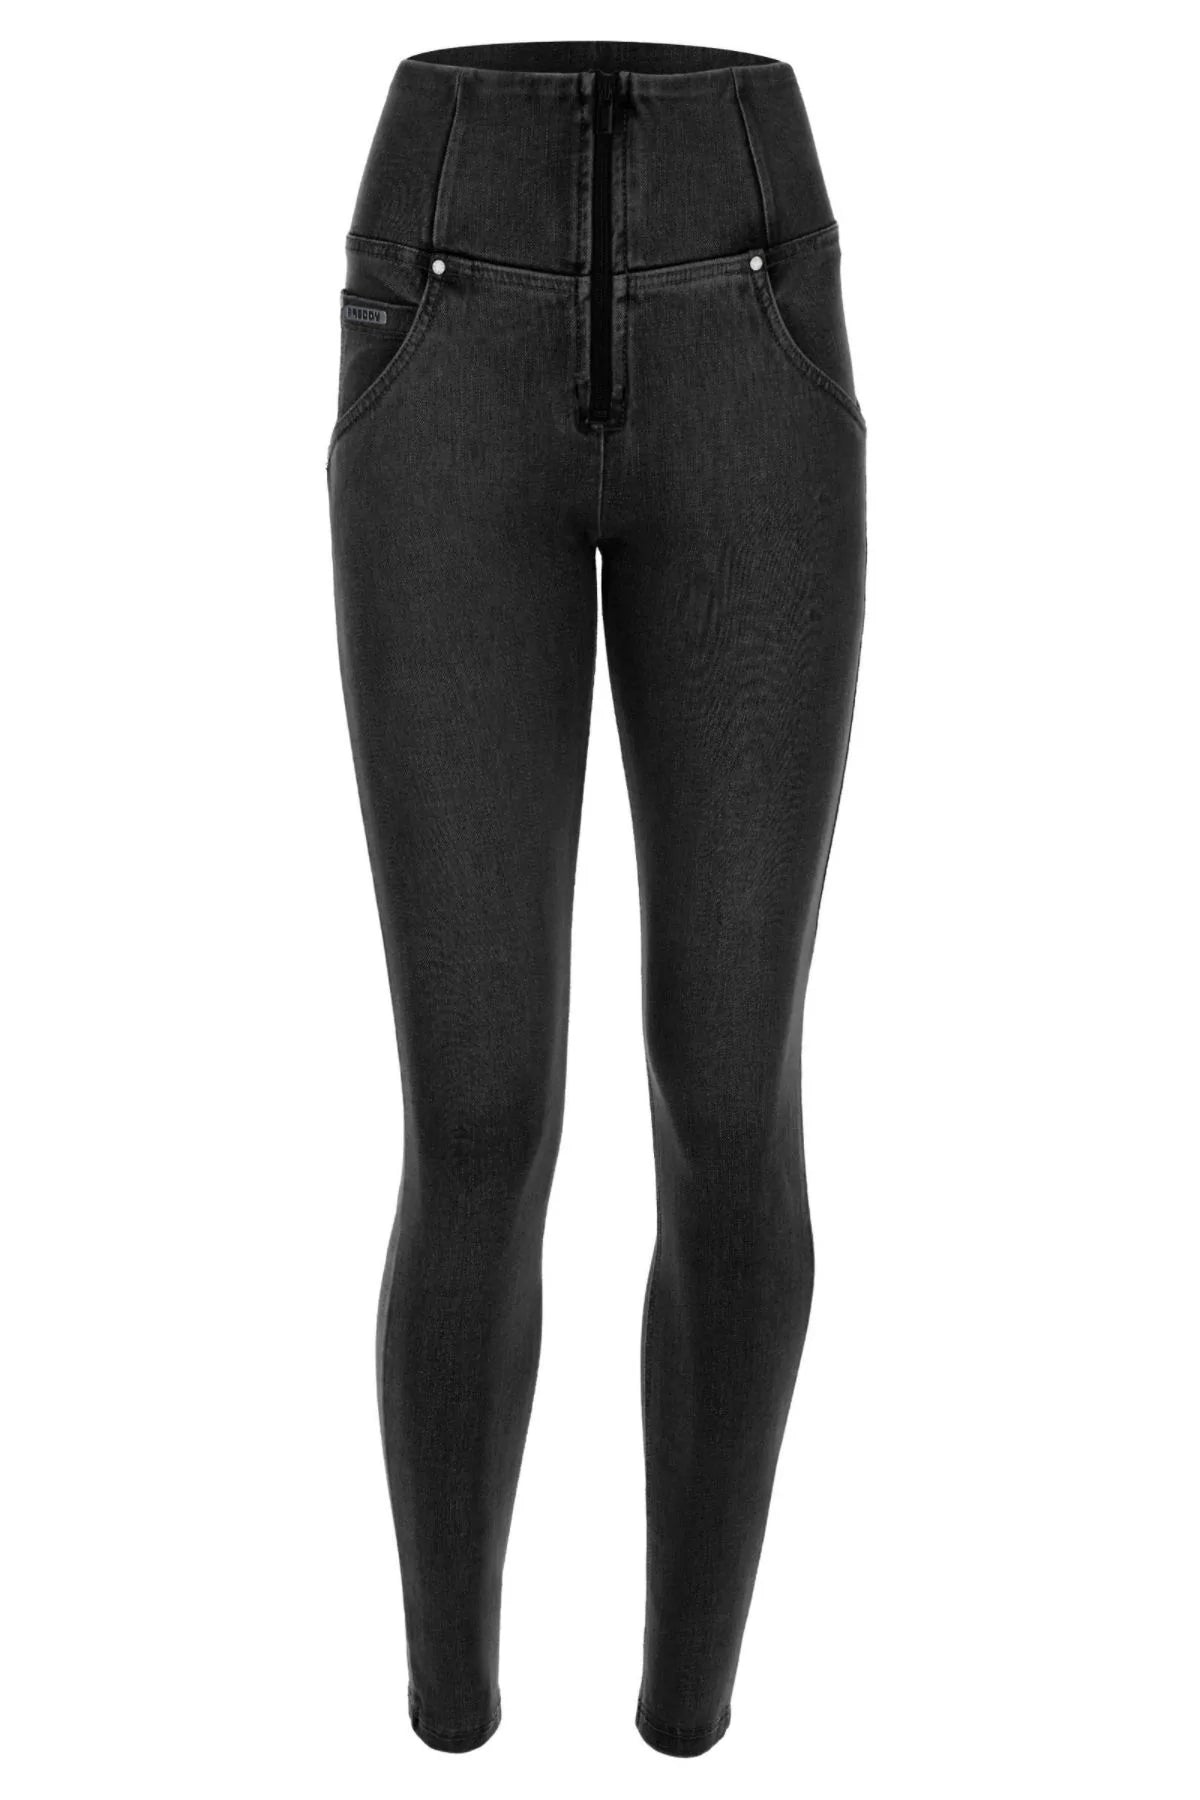 FREDDY WR.UP® NEW BLACK DENIM JEANS WITH POCKETS HIGH RISE-Fi&Co Boutique